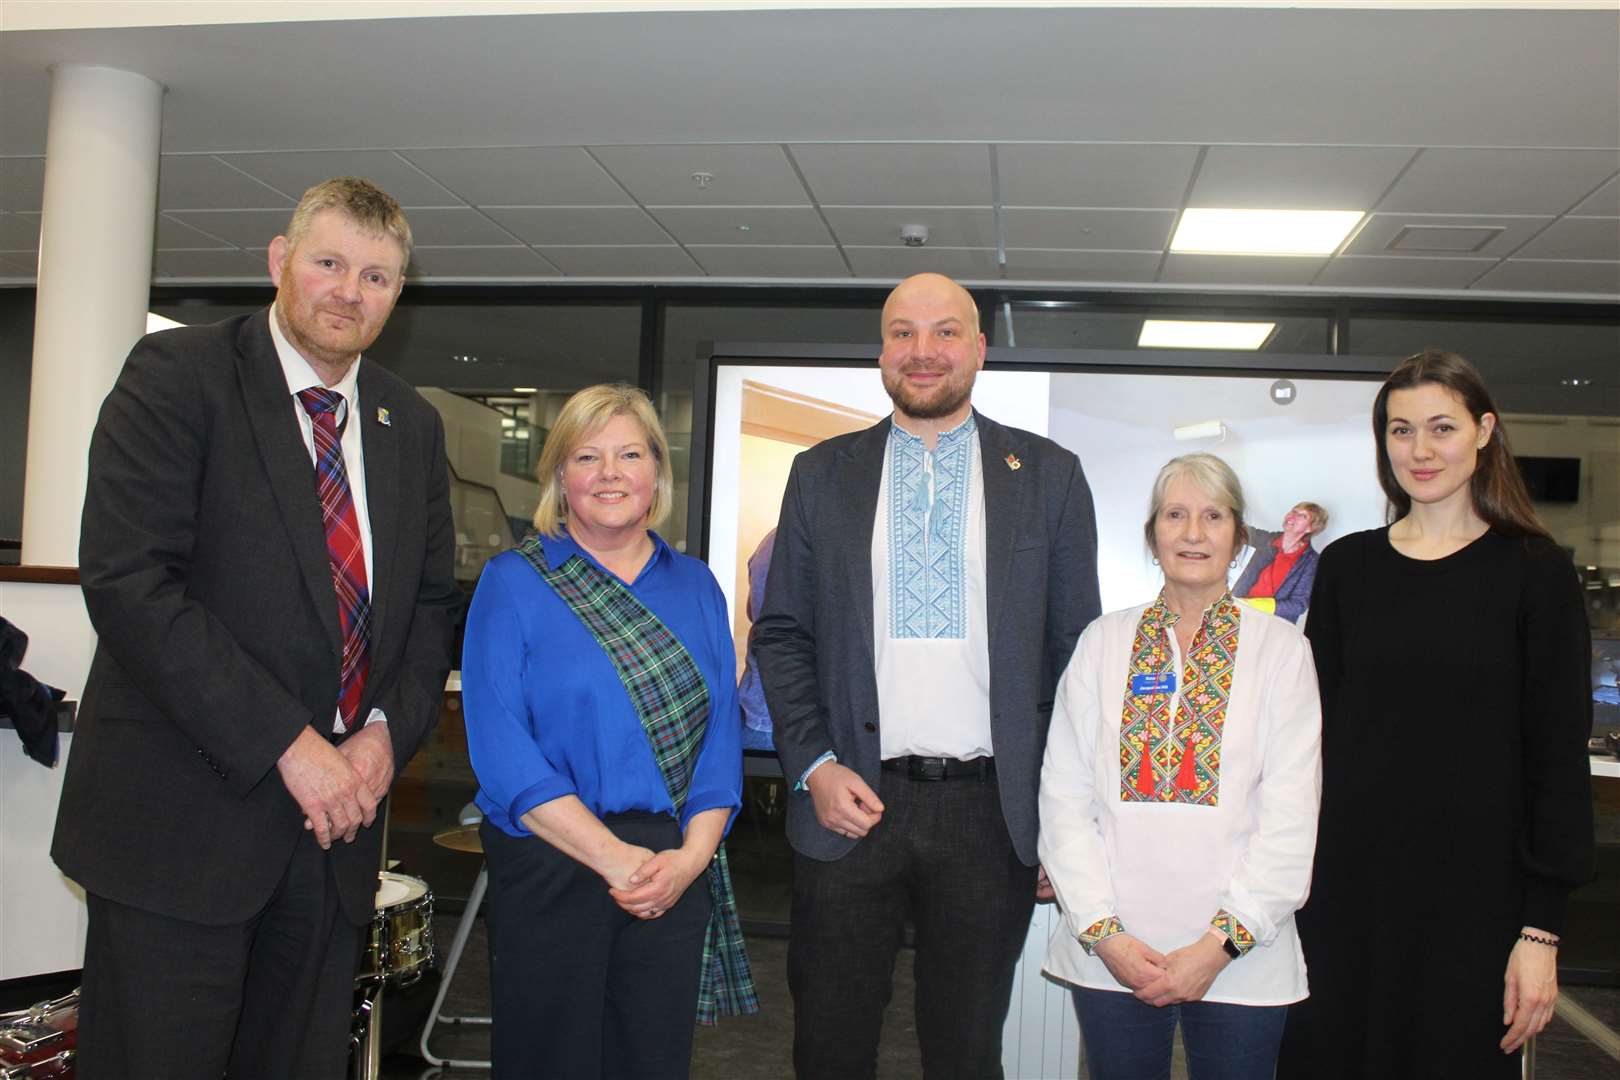 Inverurie academy head Neil Hendry, Provost Judy Whyte, Erik Avetisov. Ythan Valley Rotary president Jacqeline Hill, Olha Avetisova at Monday's Ukraine-Scotland social evening at Inverurie community campus. Picture: Griselda McGregor